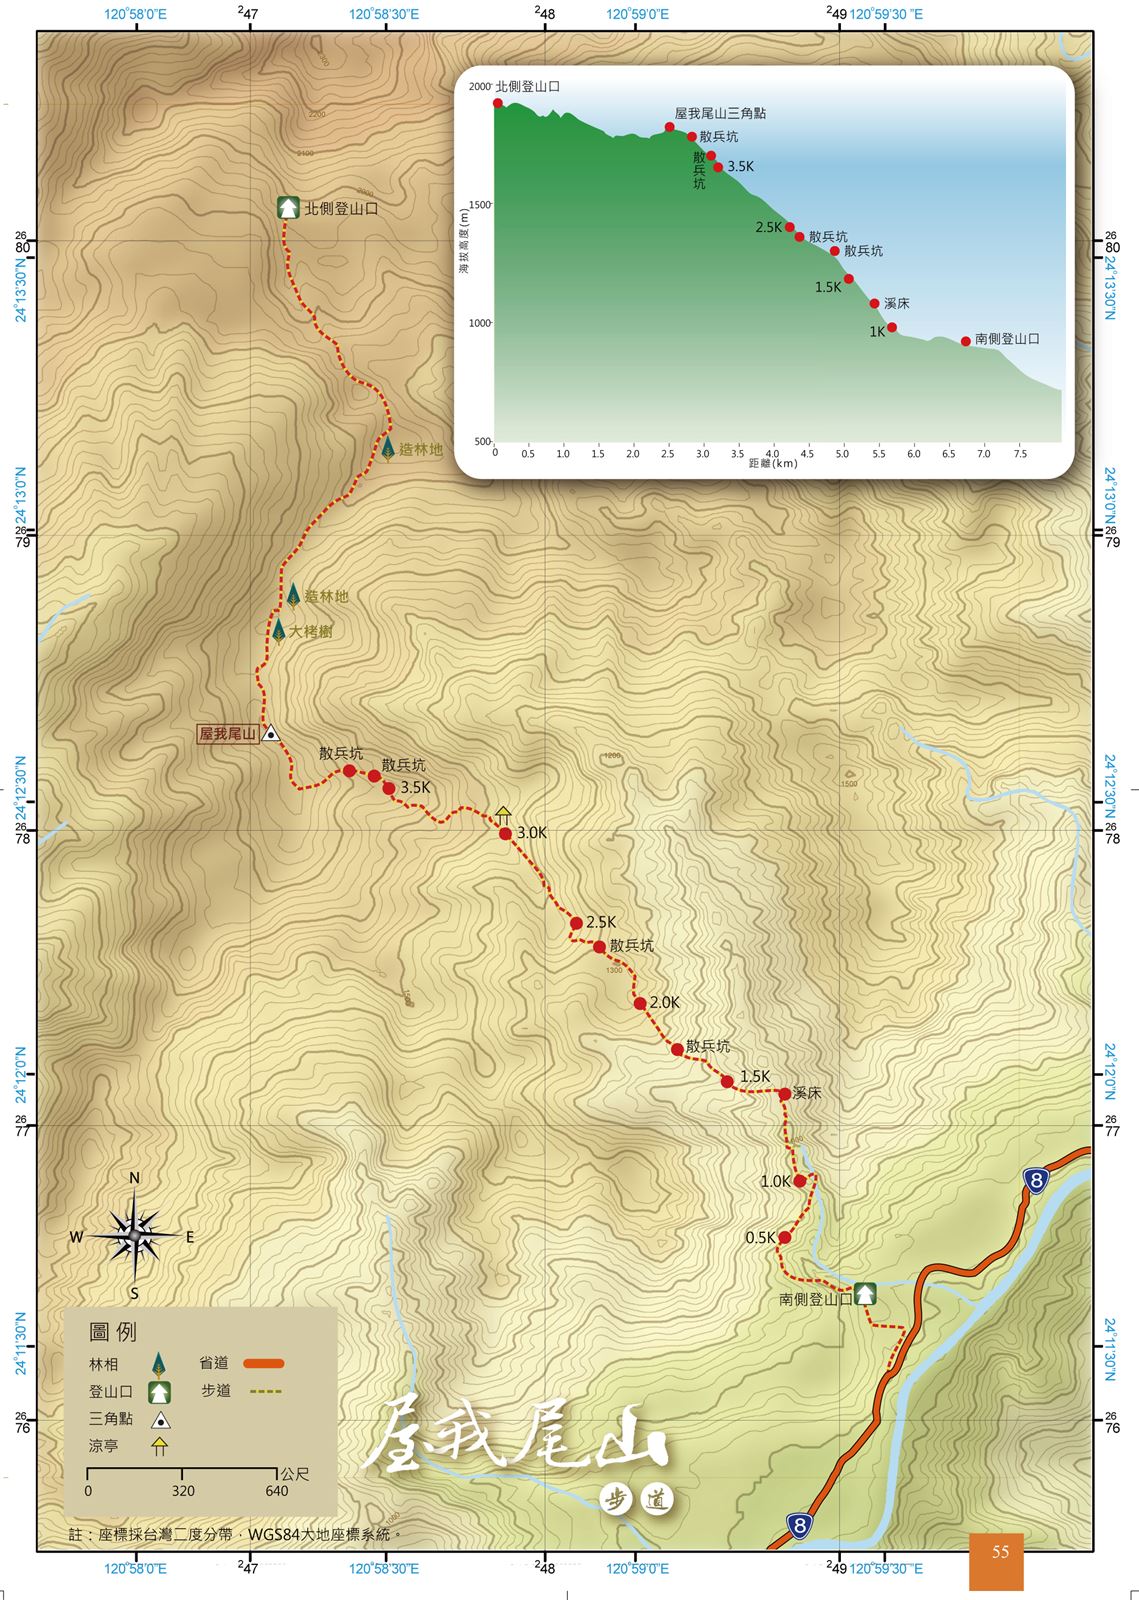 Trail route